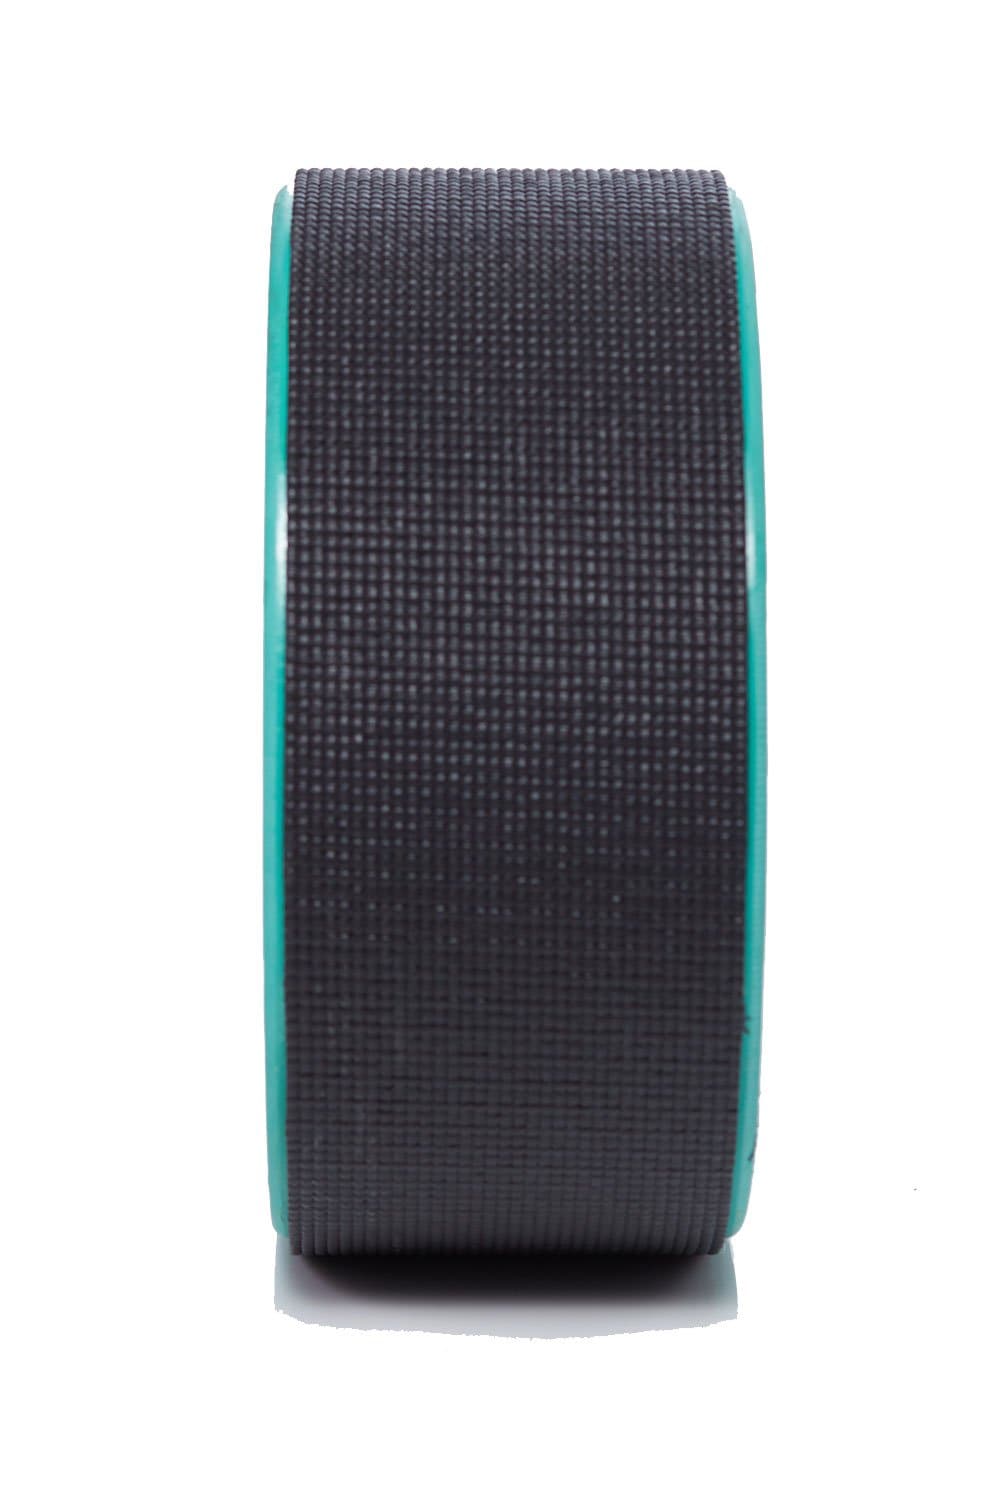 YogiWheel “Blessed are the flexible, for they will not be bent out of shape - Evolve Fit Wear